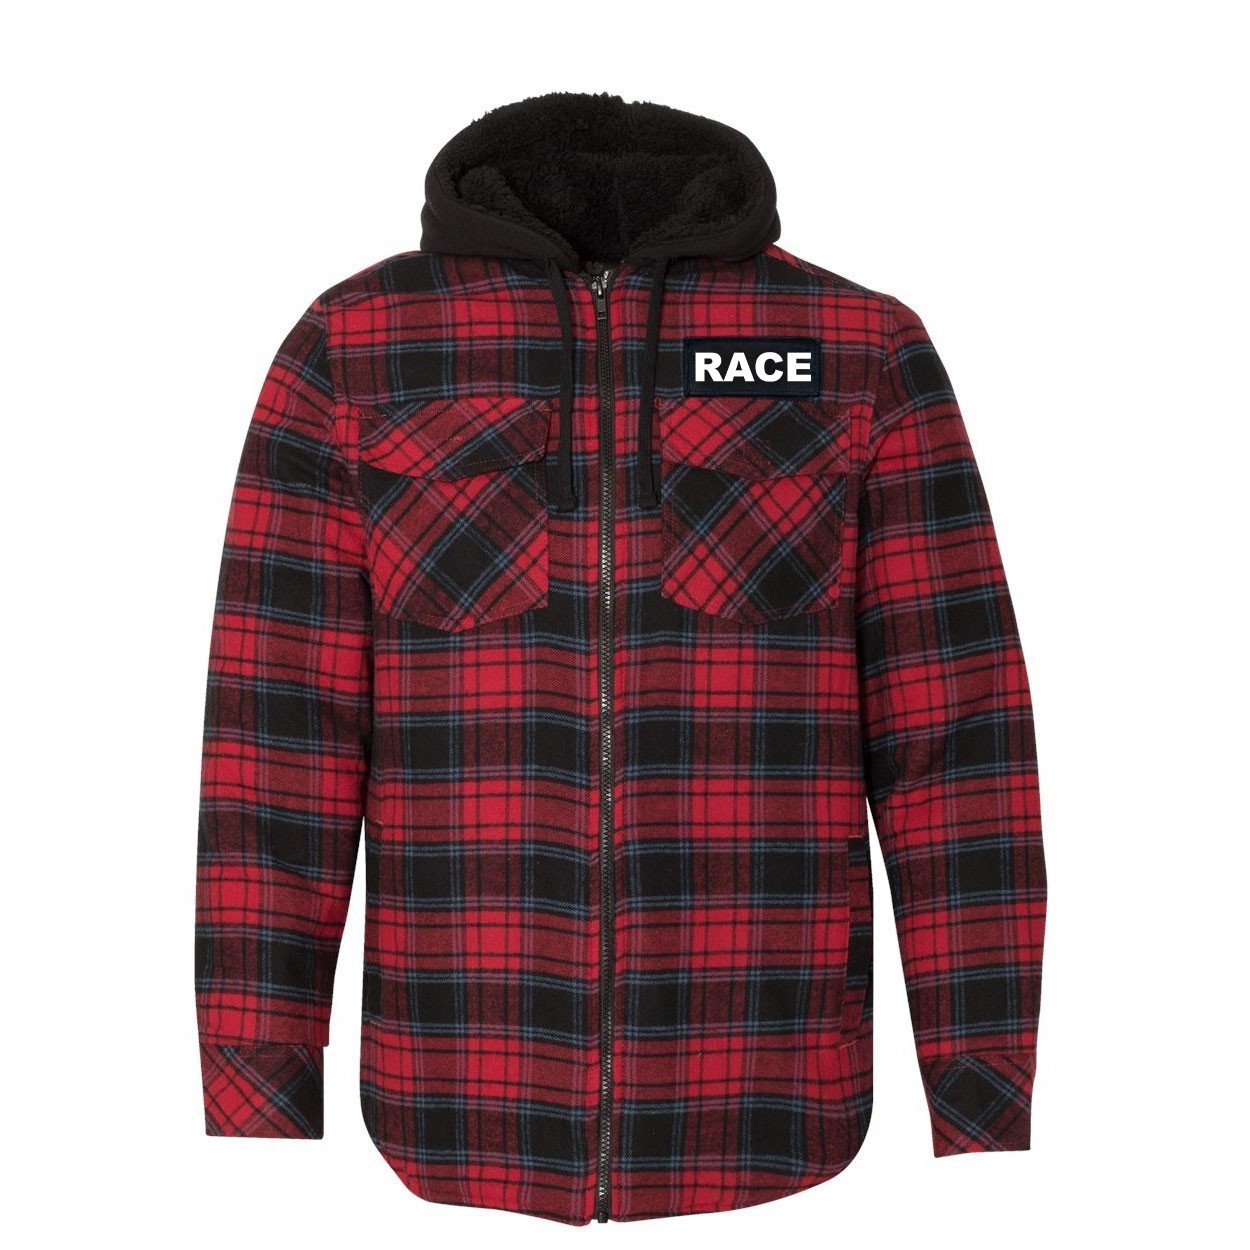 Race Brand Logo Classic Unisex Full Zip Woven Patch Hooded Flannel Jacket Red/Black Buffalo